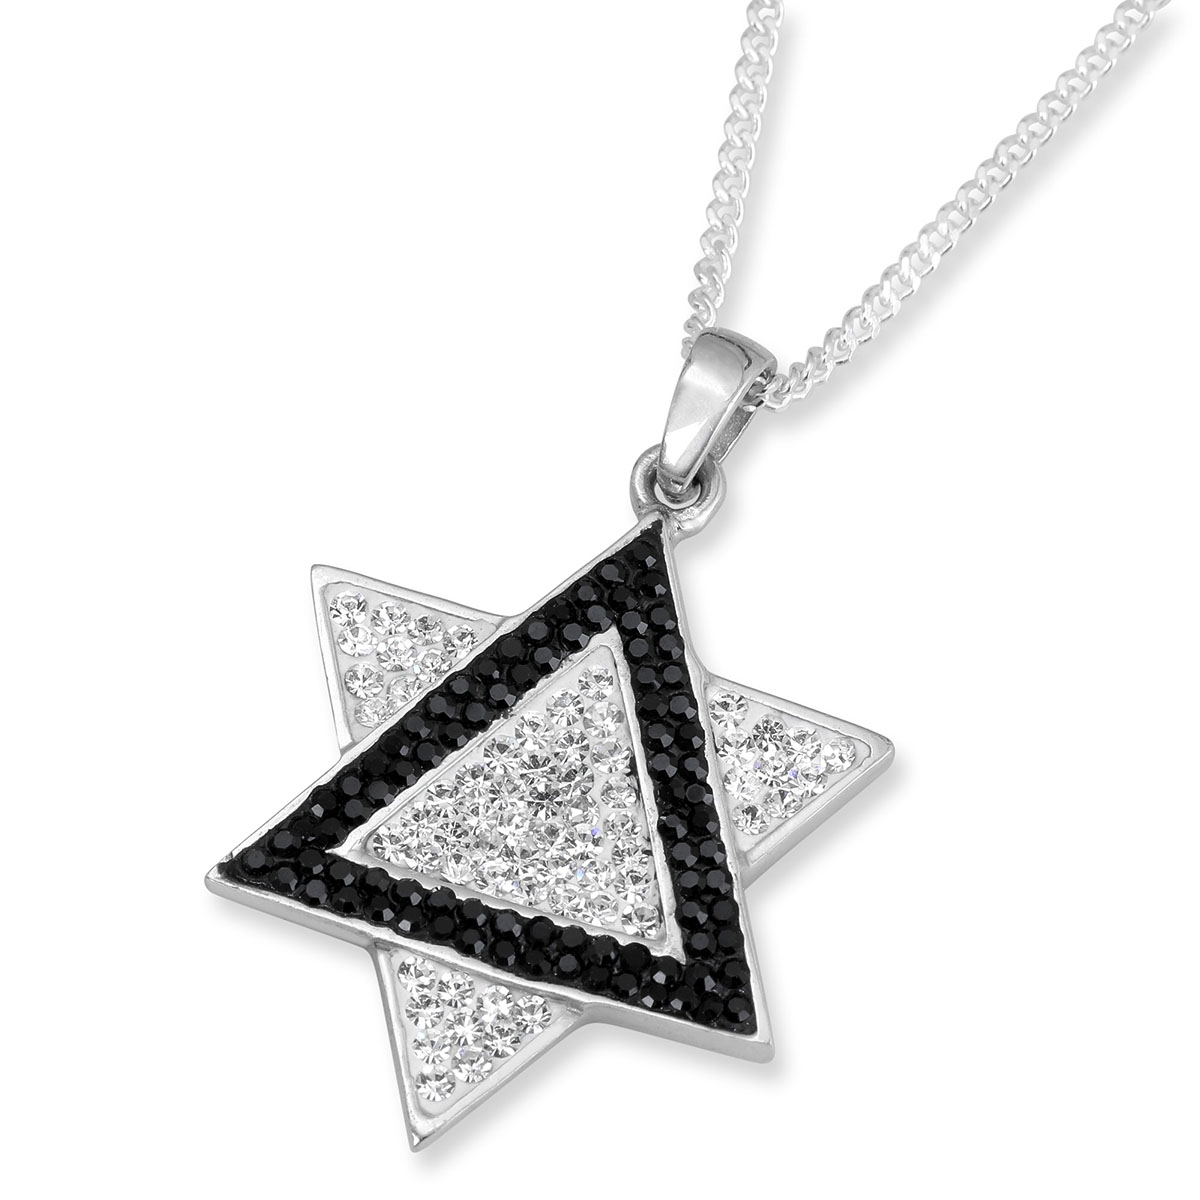 925 Sterling Silver Designer Star of David Pendant With Black and White Crystal Stones - 1